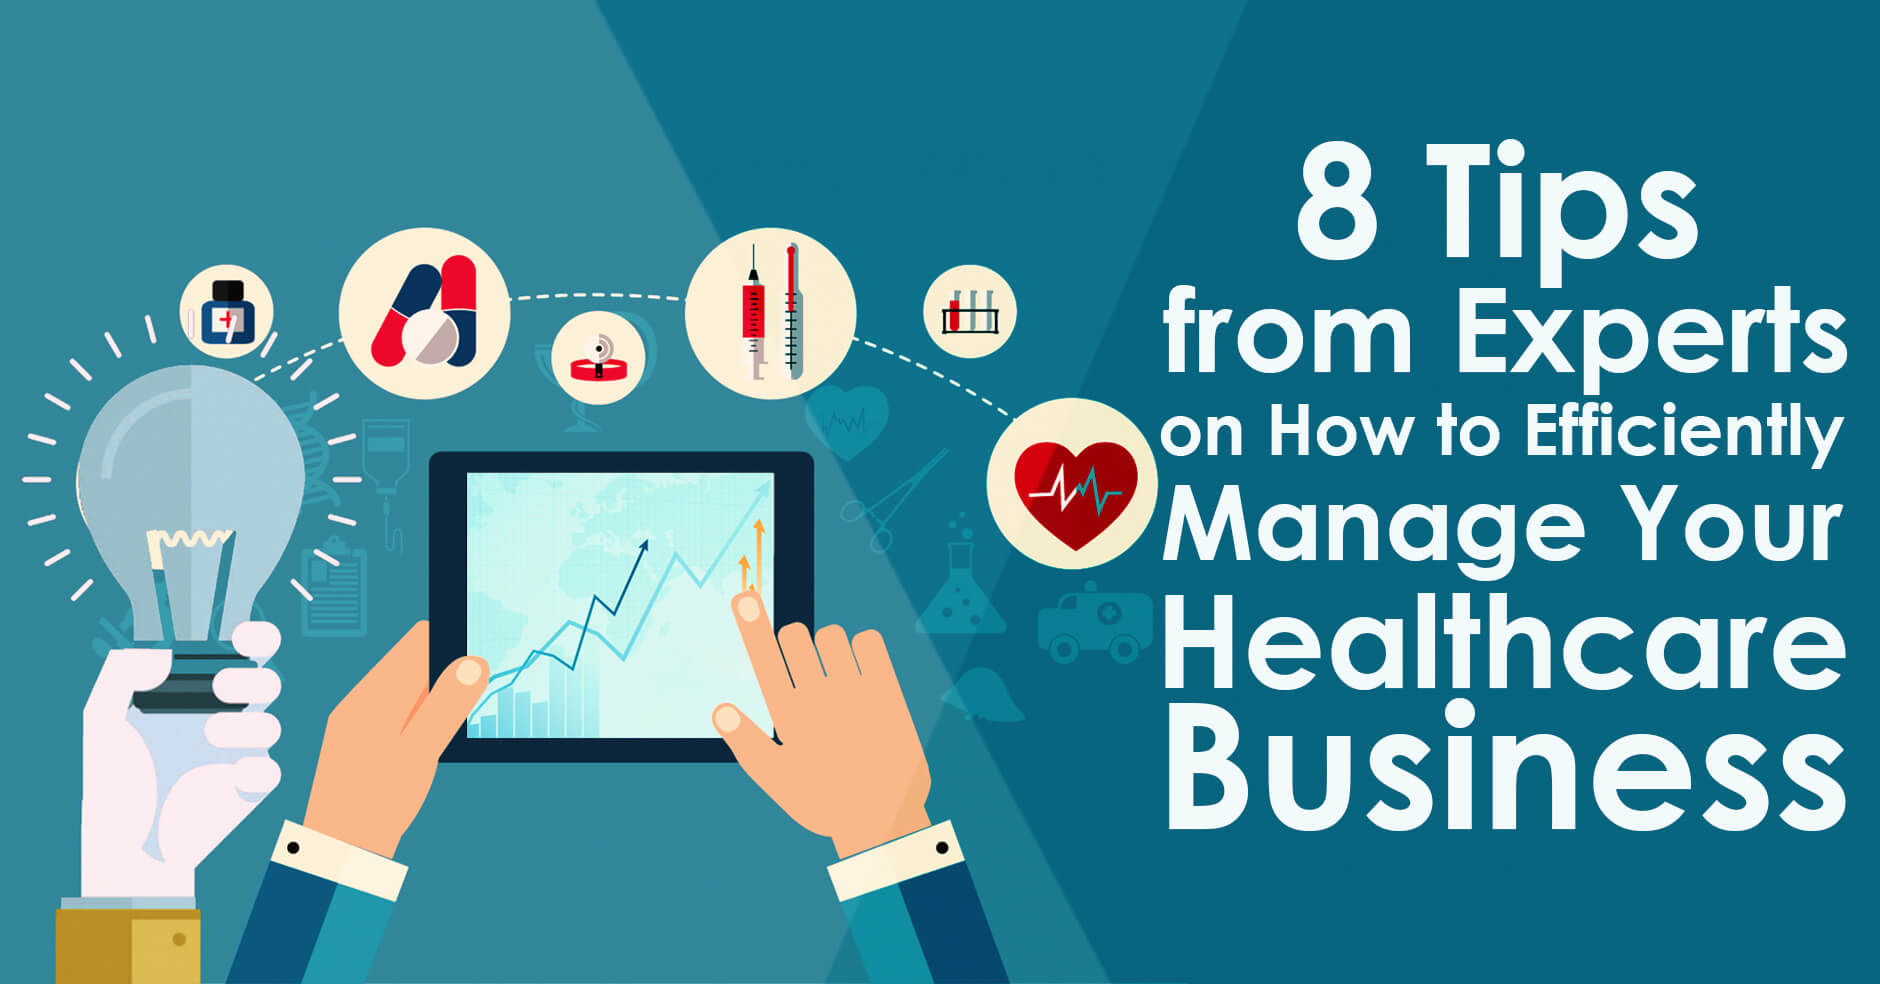 8 Tips from Experts on How to Efficiently Manage Your Healthcare Business - Medicoreach